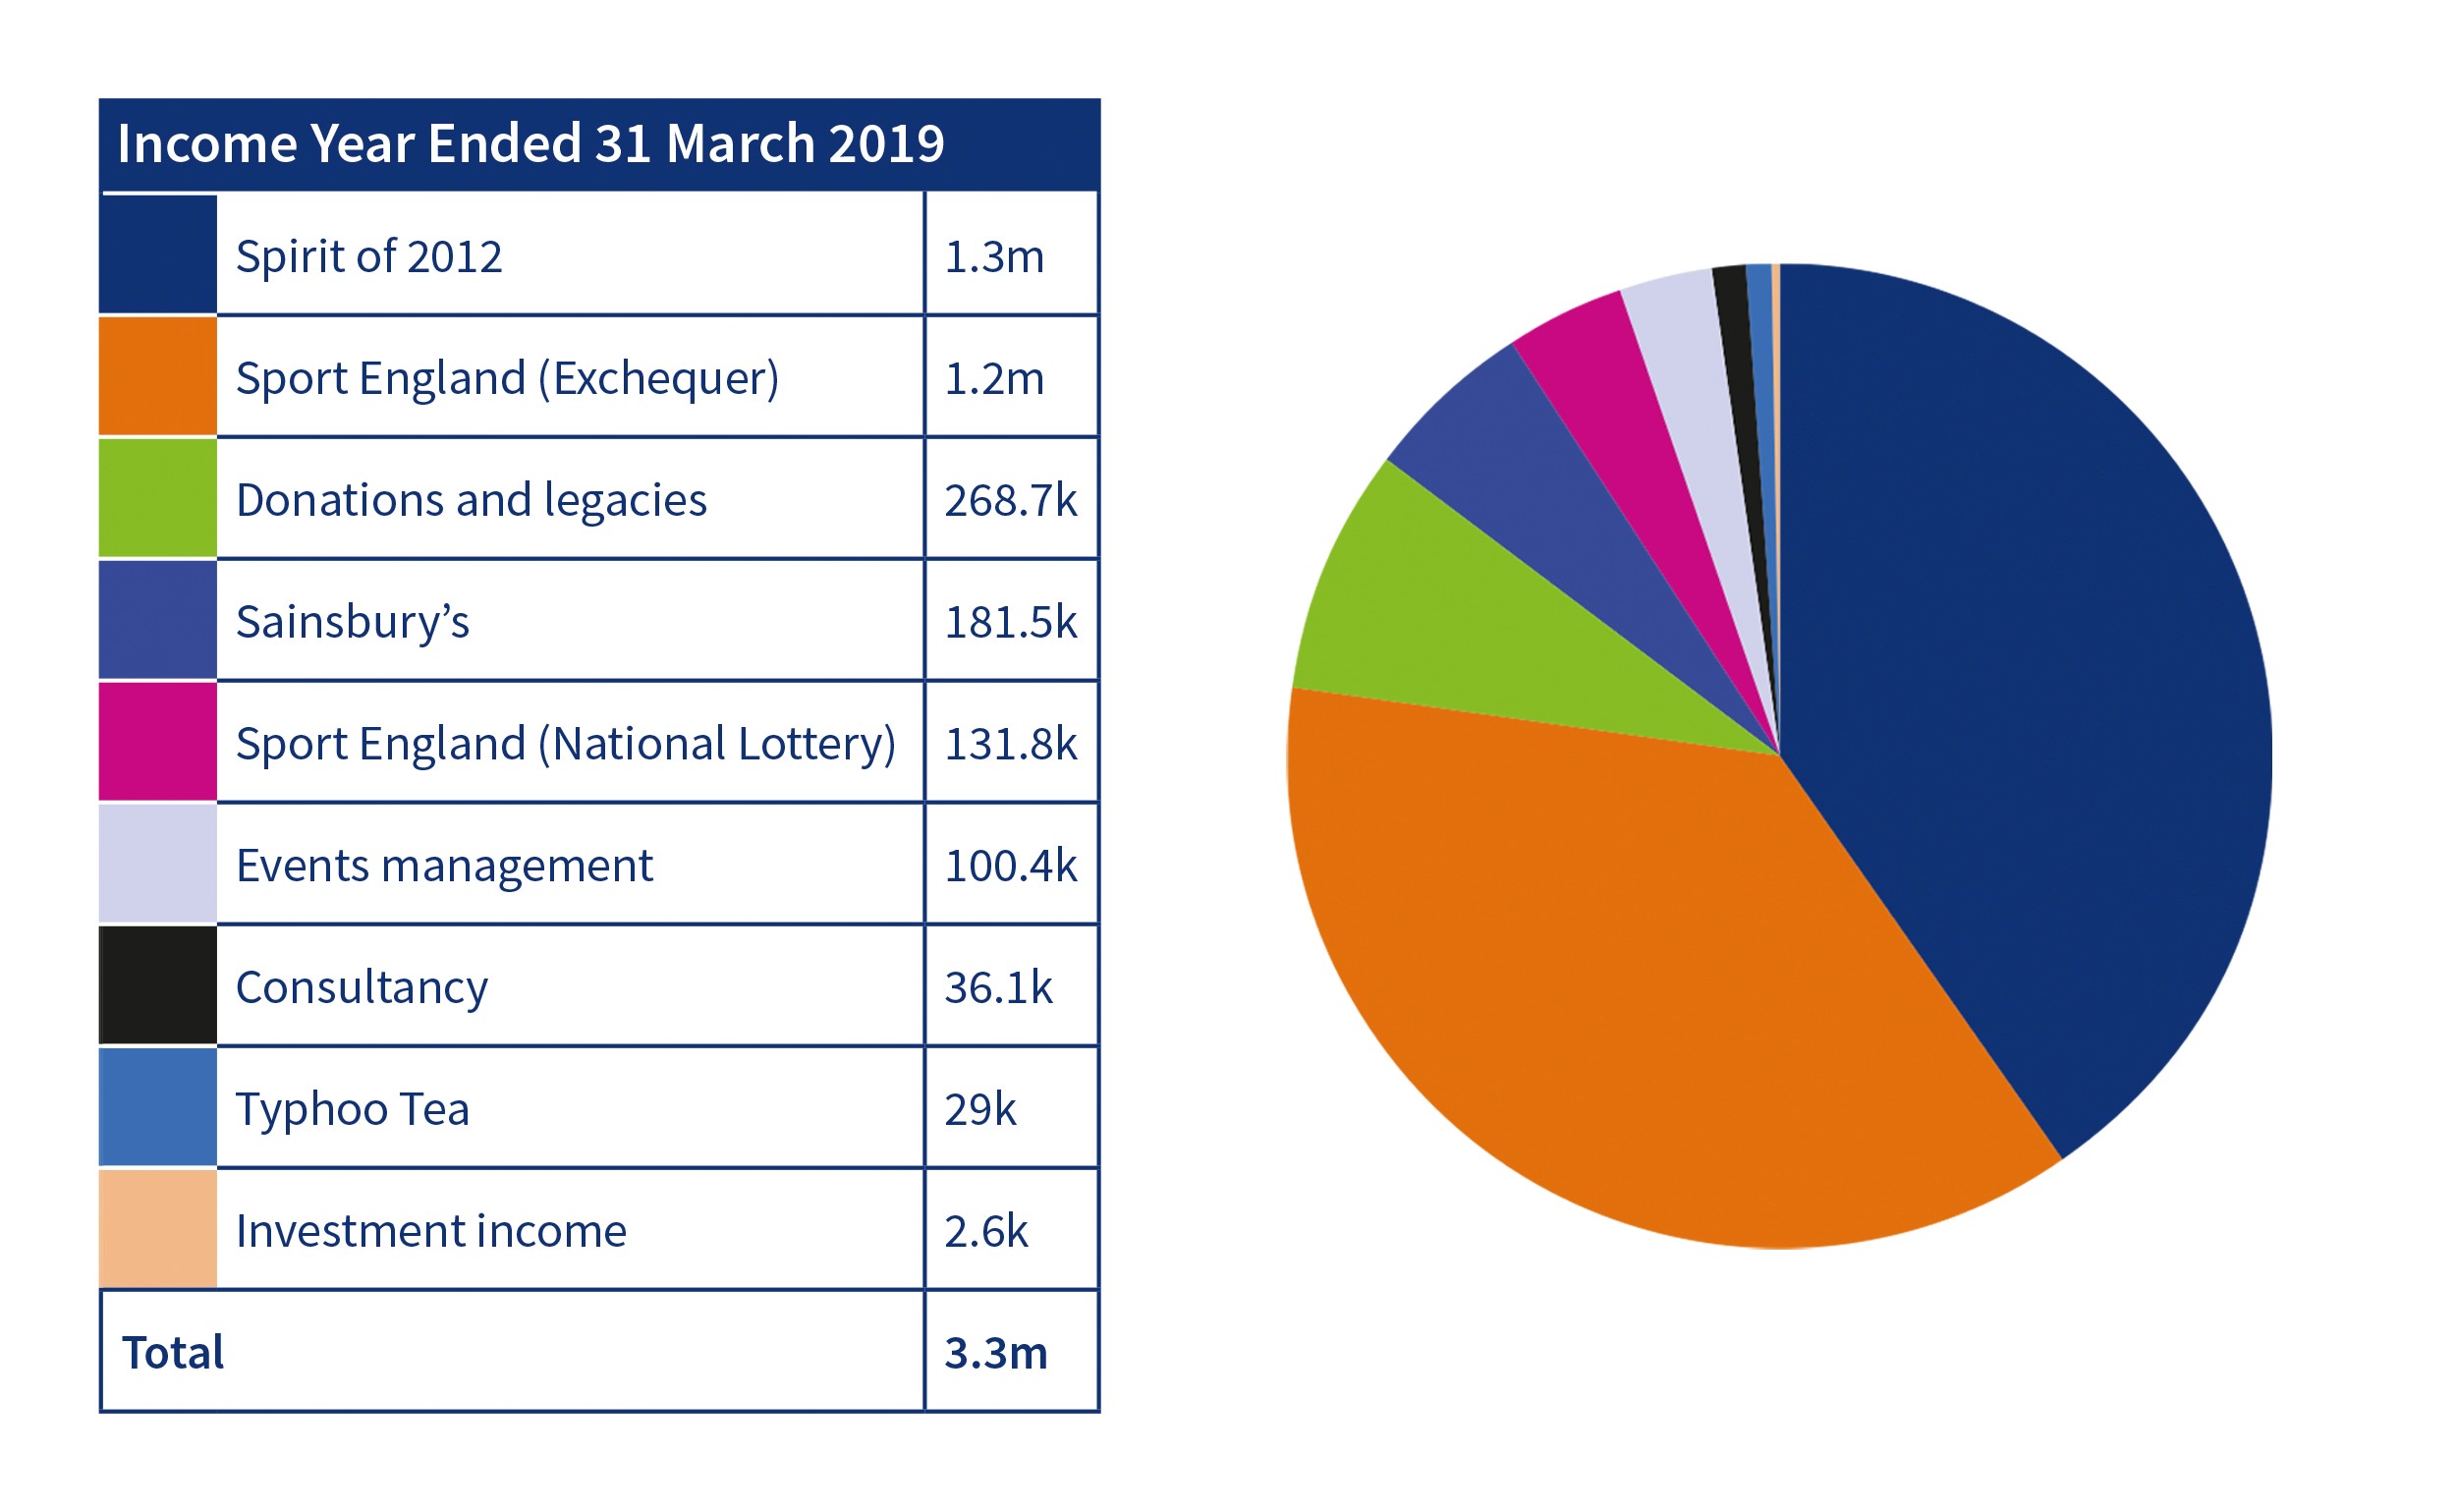 Activity Alliance income year ended 31 March 2019 table and pie chart